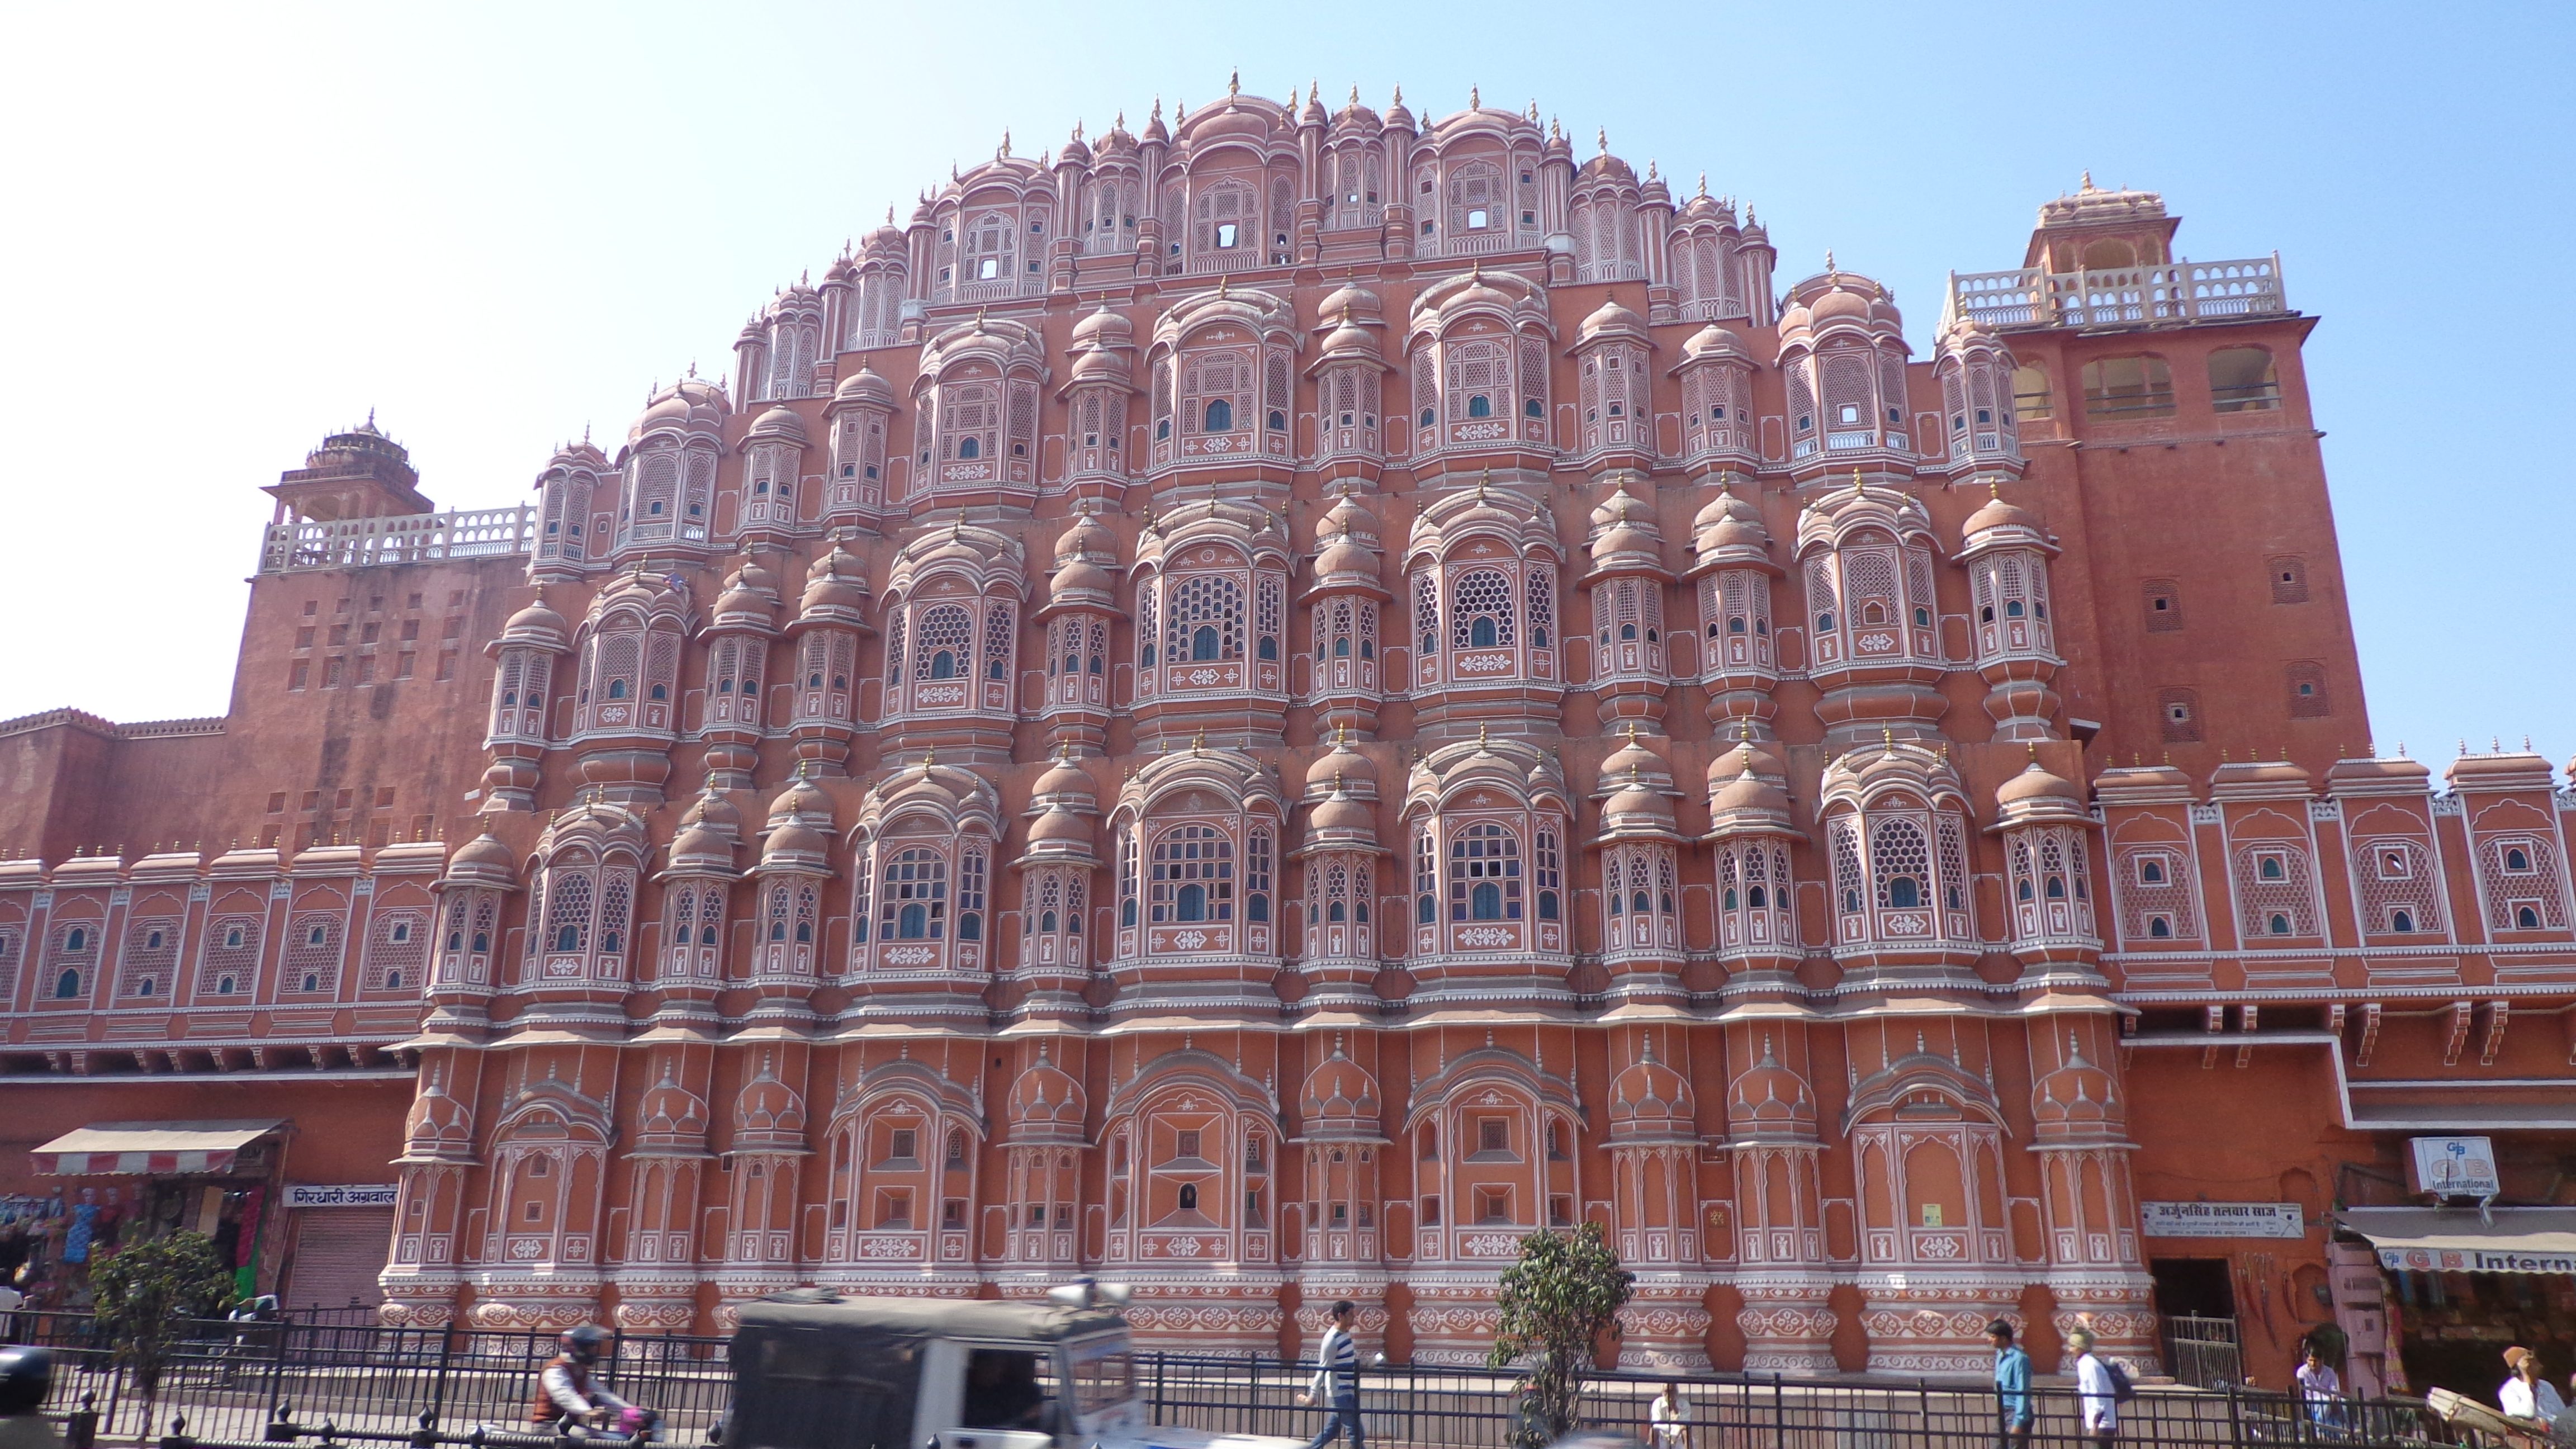 ARCHITECTURAL FEAT. The Hawa Mahal's exterior is an architectural feat and is one of the main attractions in Jaipur. 